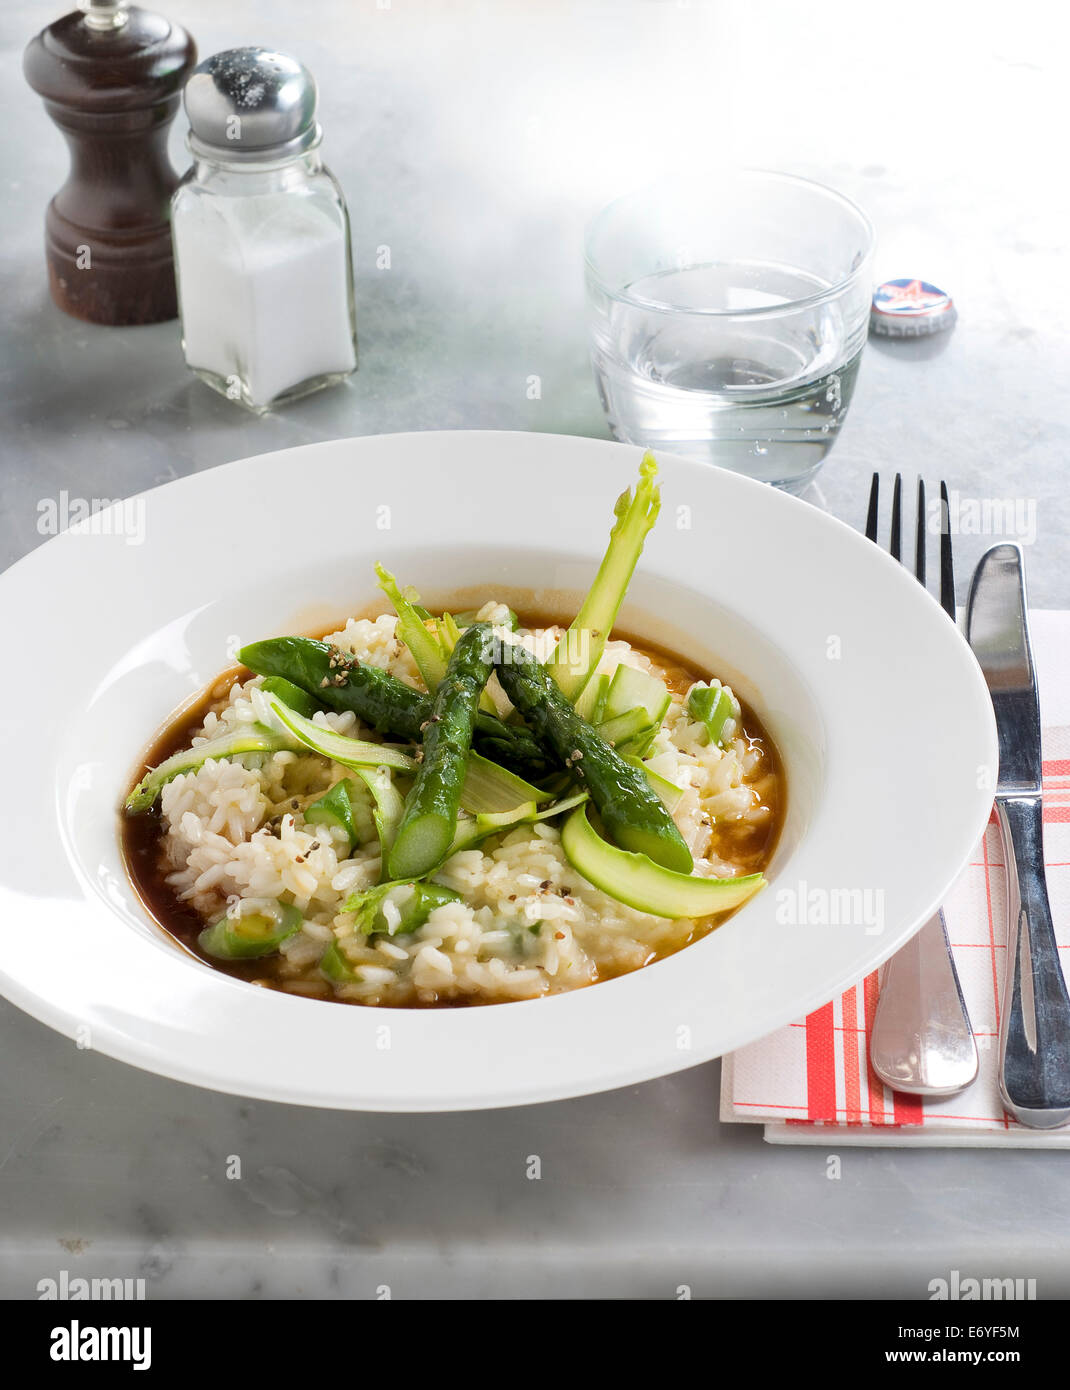 Asparagus risotto Stock Photo